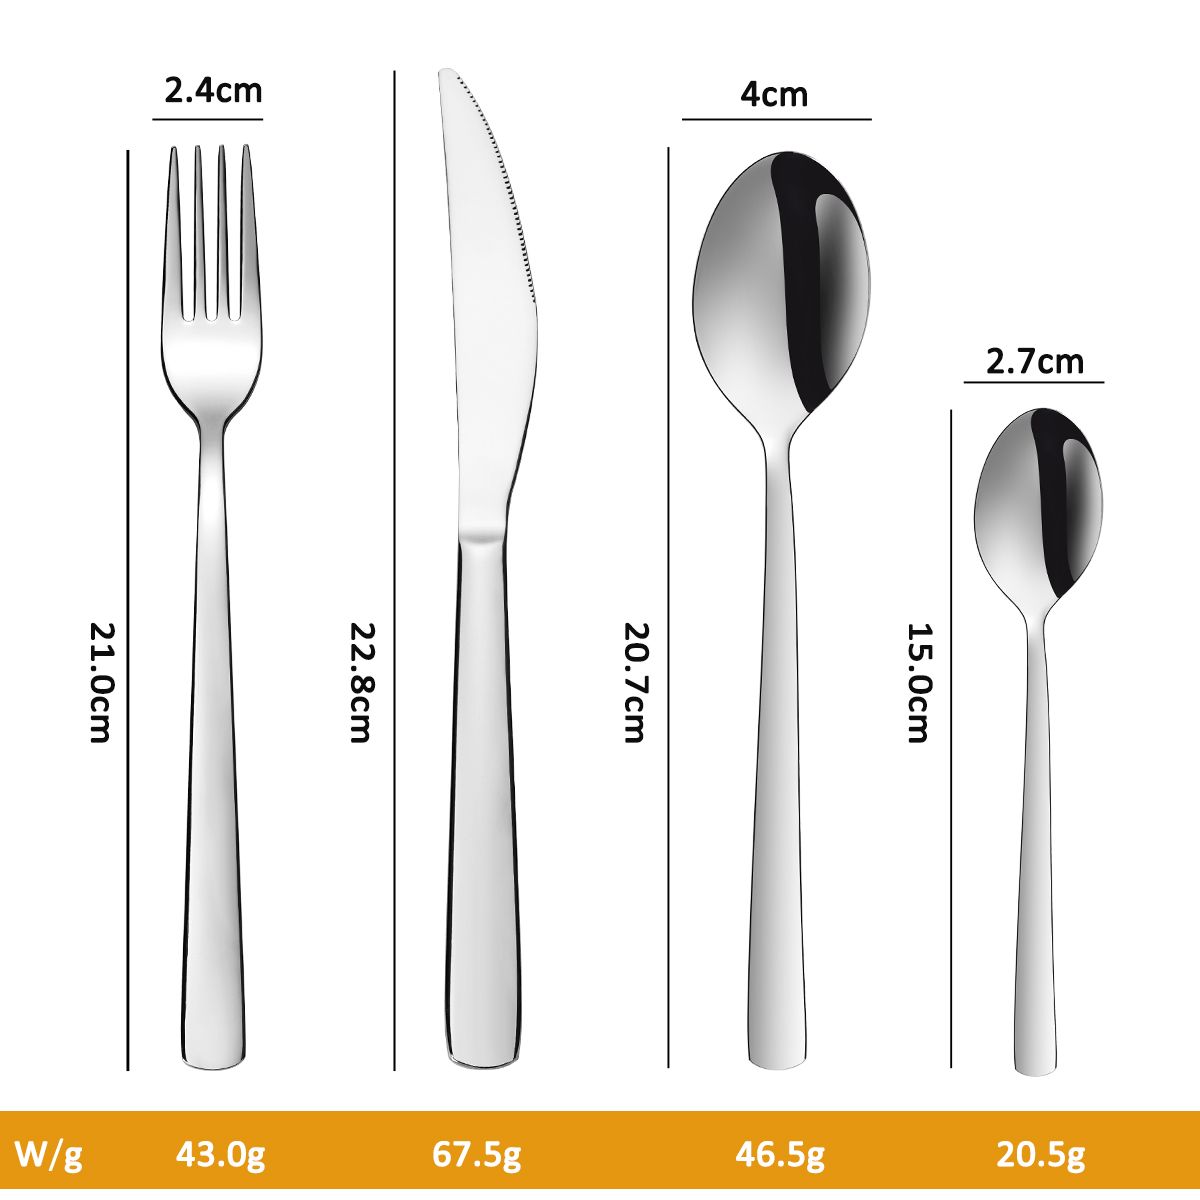 Wholesale Restaurant Cutlery William Rogers Sons Silverware China Wm Son Set Stainless Spoon And Fork Supplier Philippines